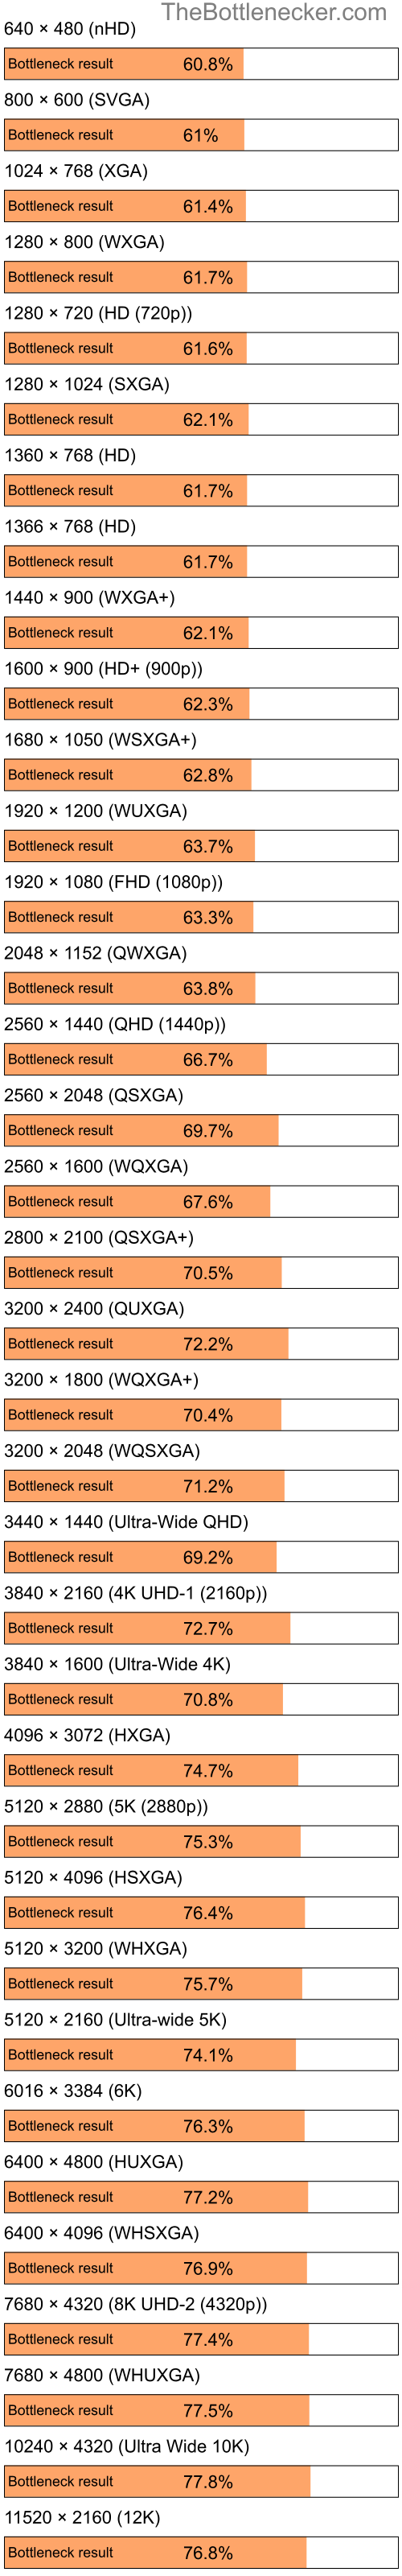 Bottleneck results by resolution for Intel Celeron M 410 and NVIDIA Quadro FX 4400 in General Tasks